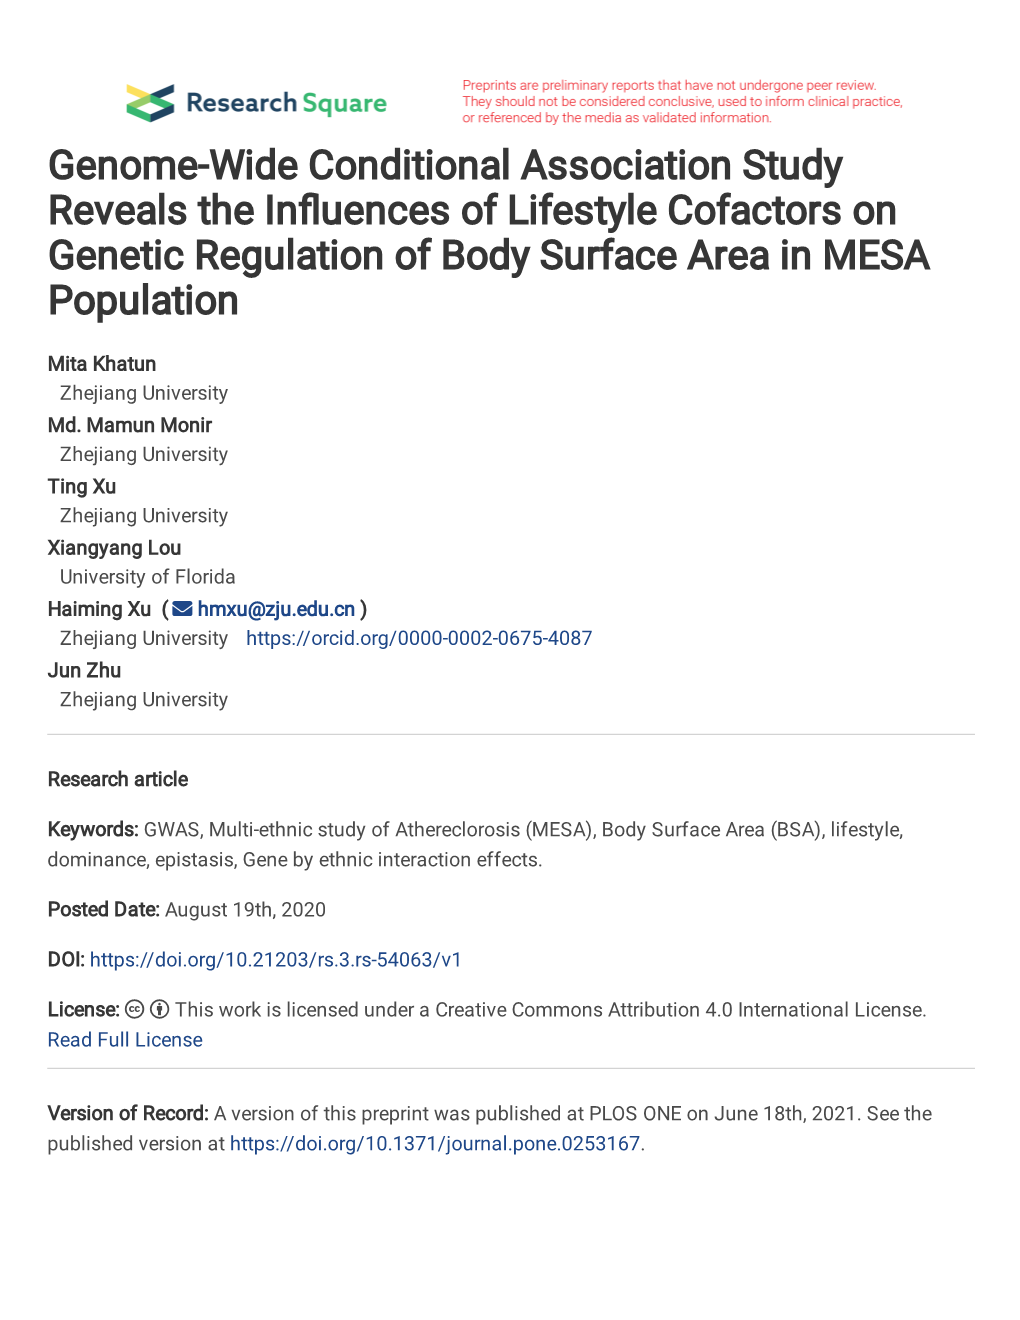 Genome-Wide Conditional Association Study Reveals the In�Uences of Lifestyle Cofactors on Genetic Regulation of Body Surface Area in MESA Population